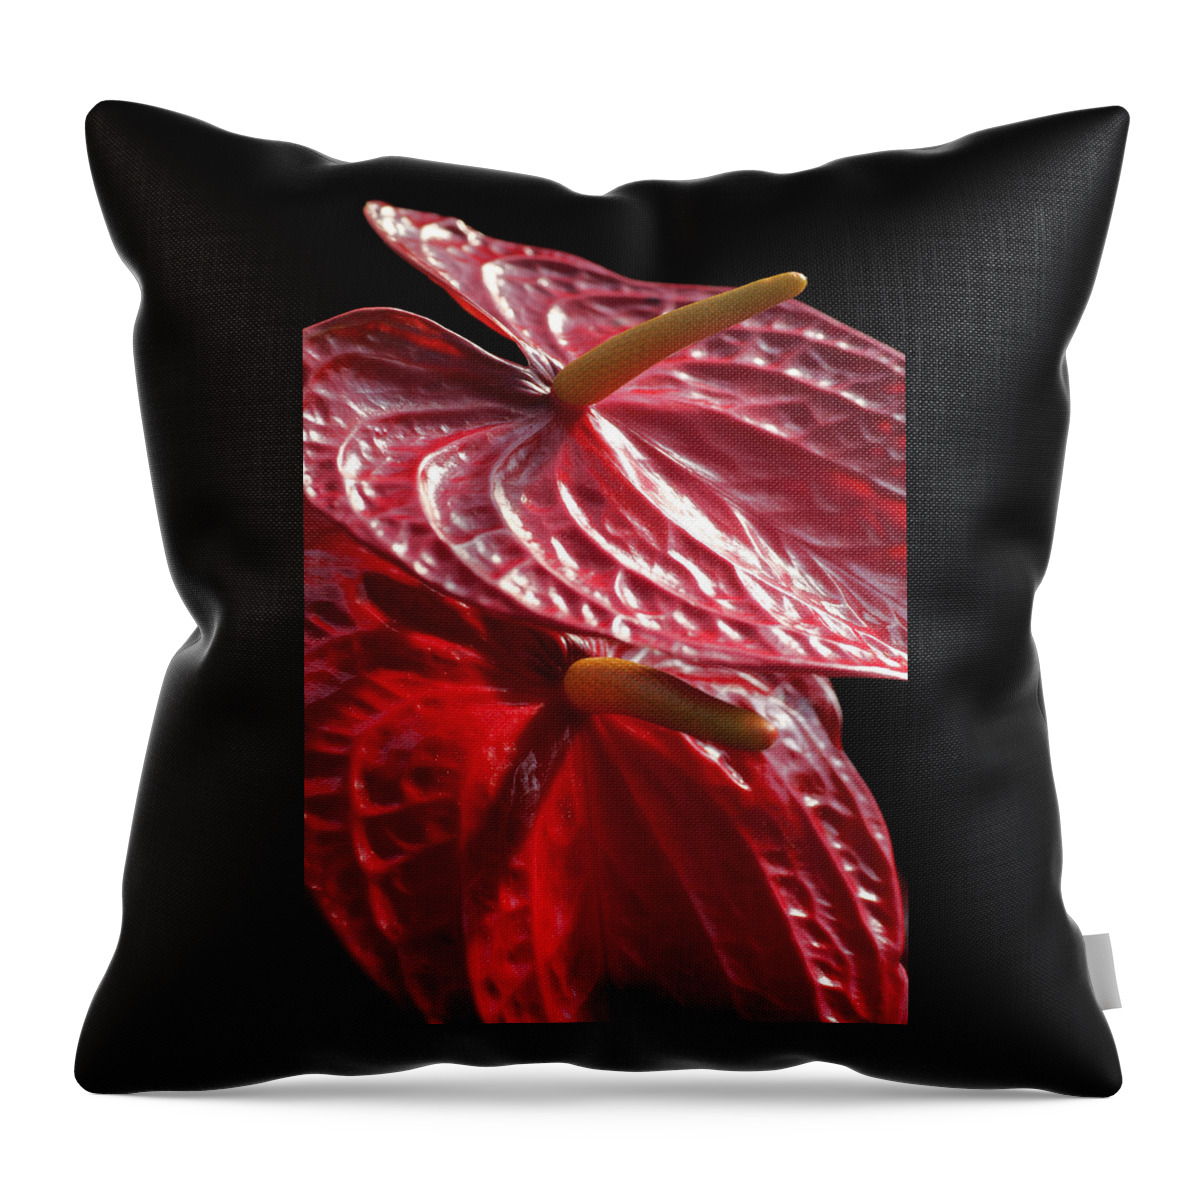 Flower Throw Pillow featuring the photograph Anthurium Flamingo by Tammy Pool